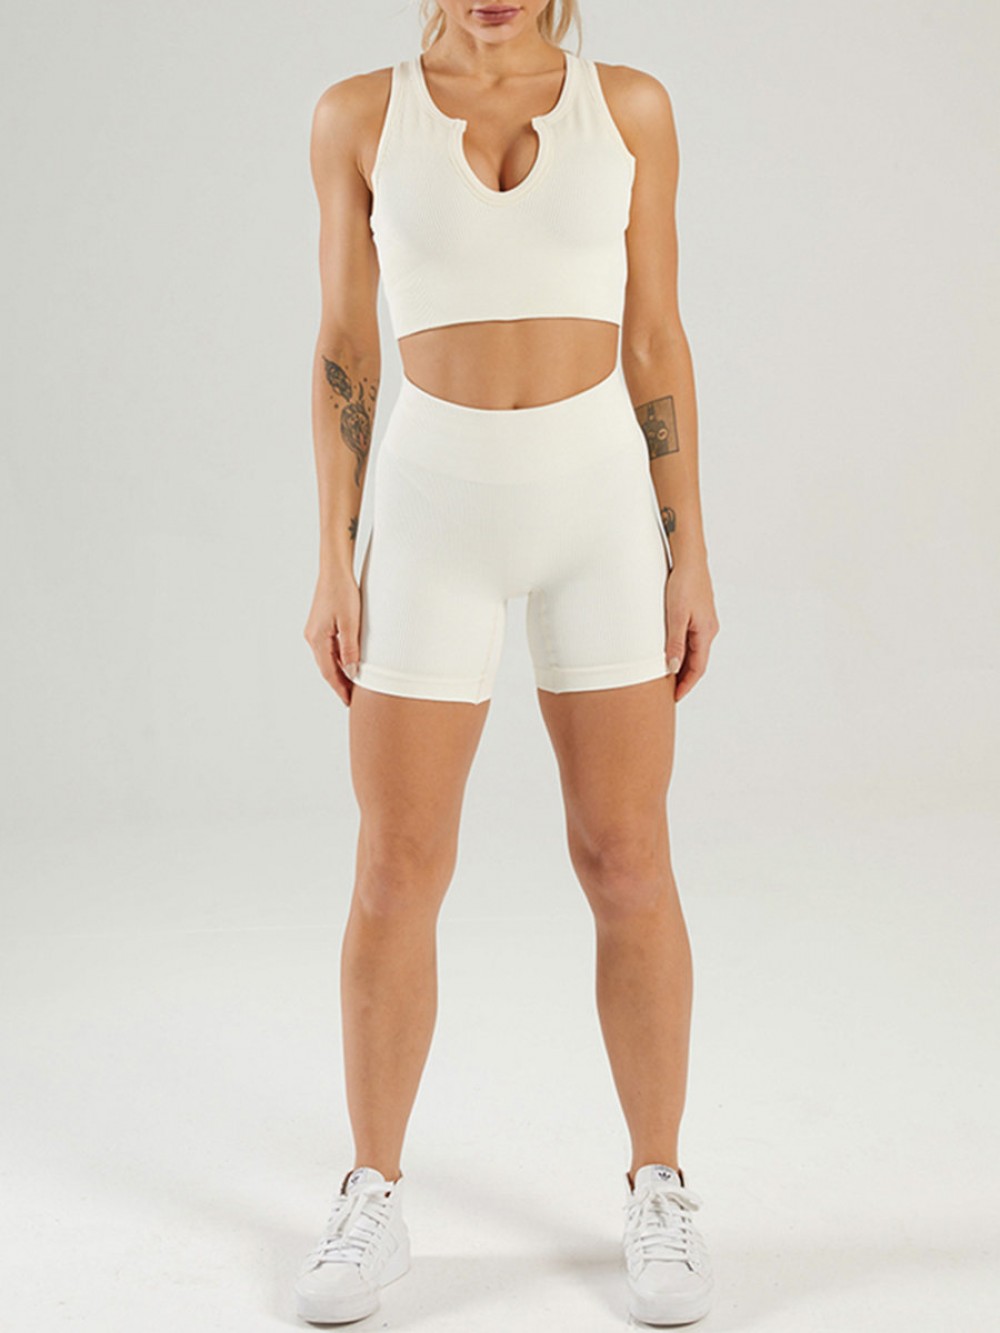 Creamy-White Seamless Yoga Bra Low Neck And Shorts Suit Online